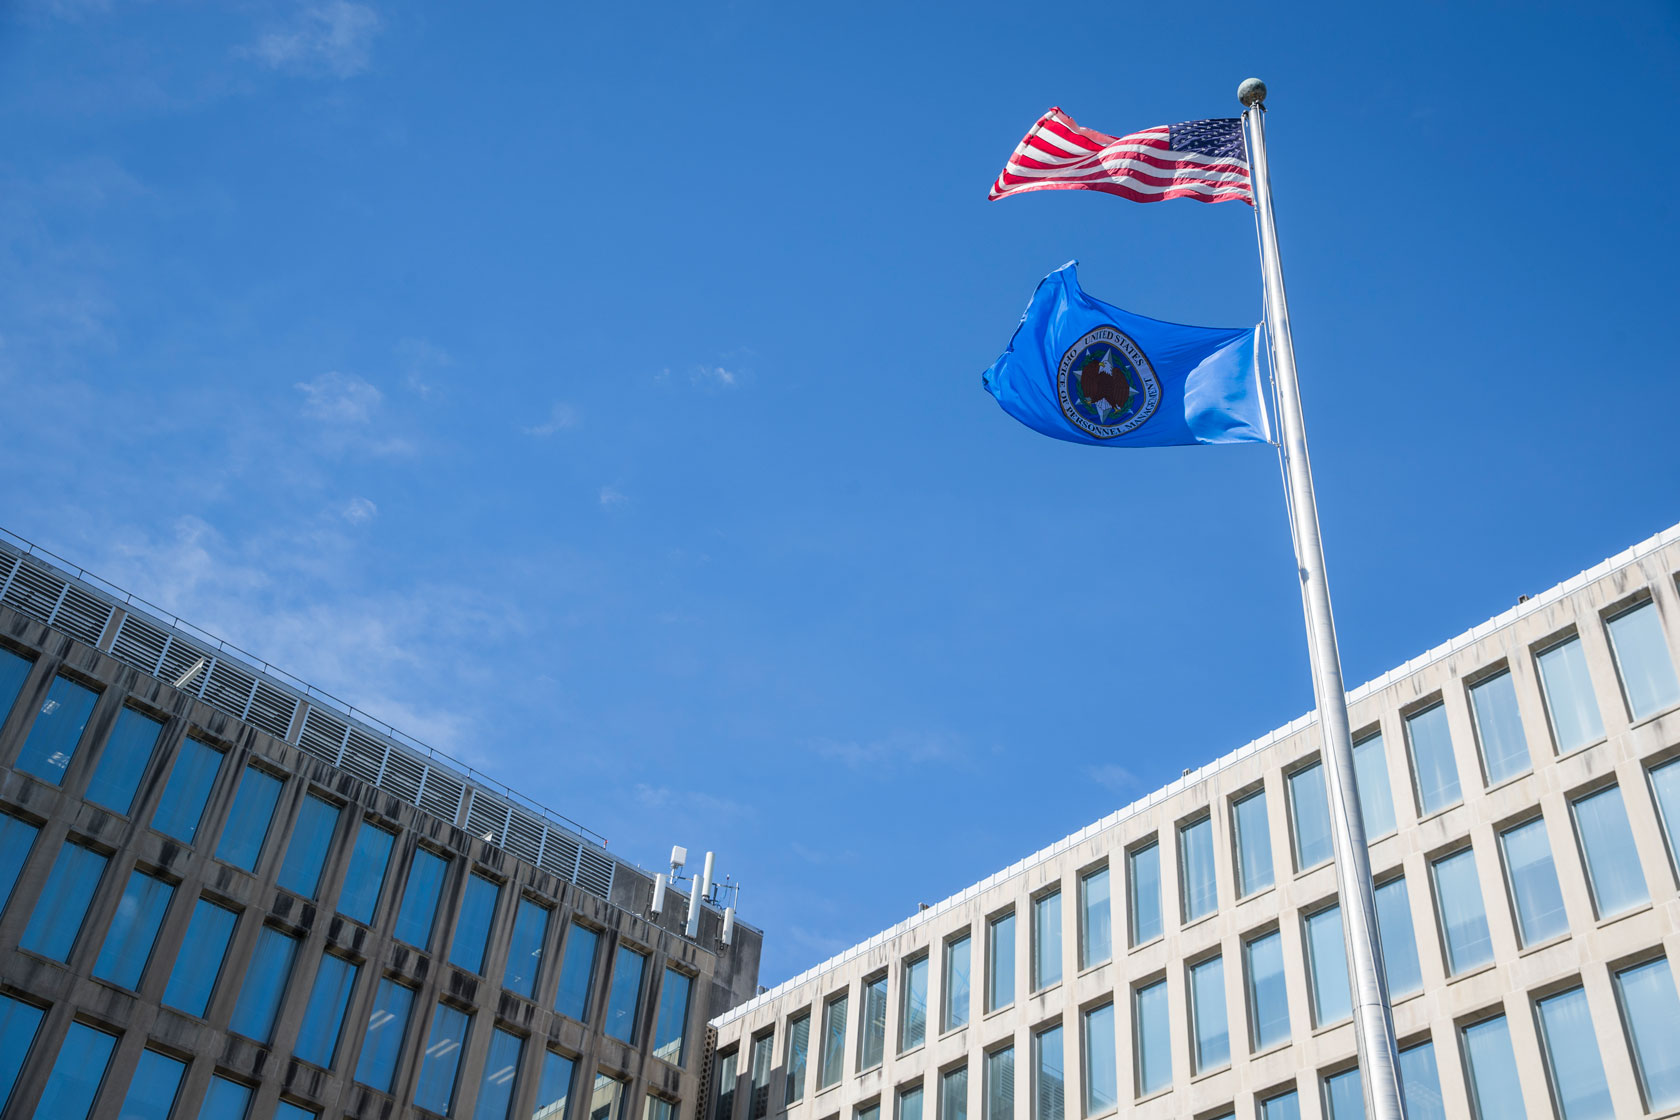 The American and U.S. Office of Personnel Management (OPM) flags blowing in the wind on a sunny day in front of the OPM building.